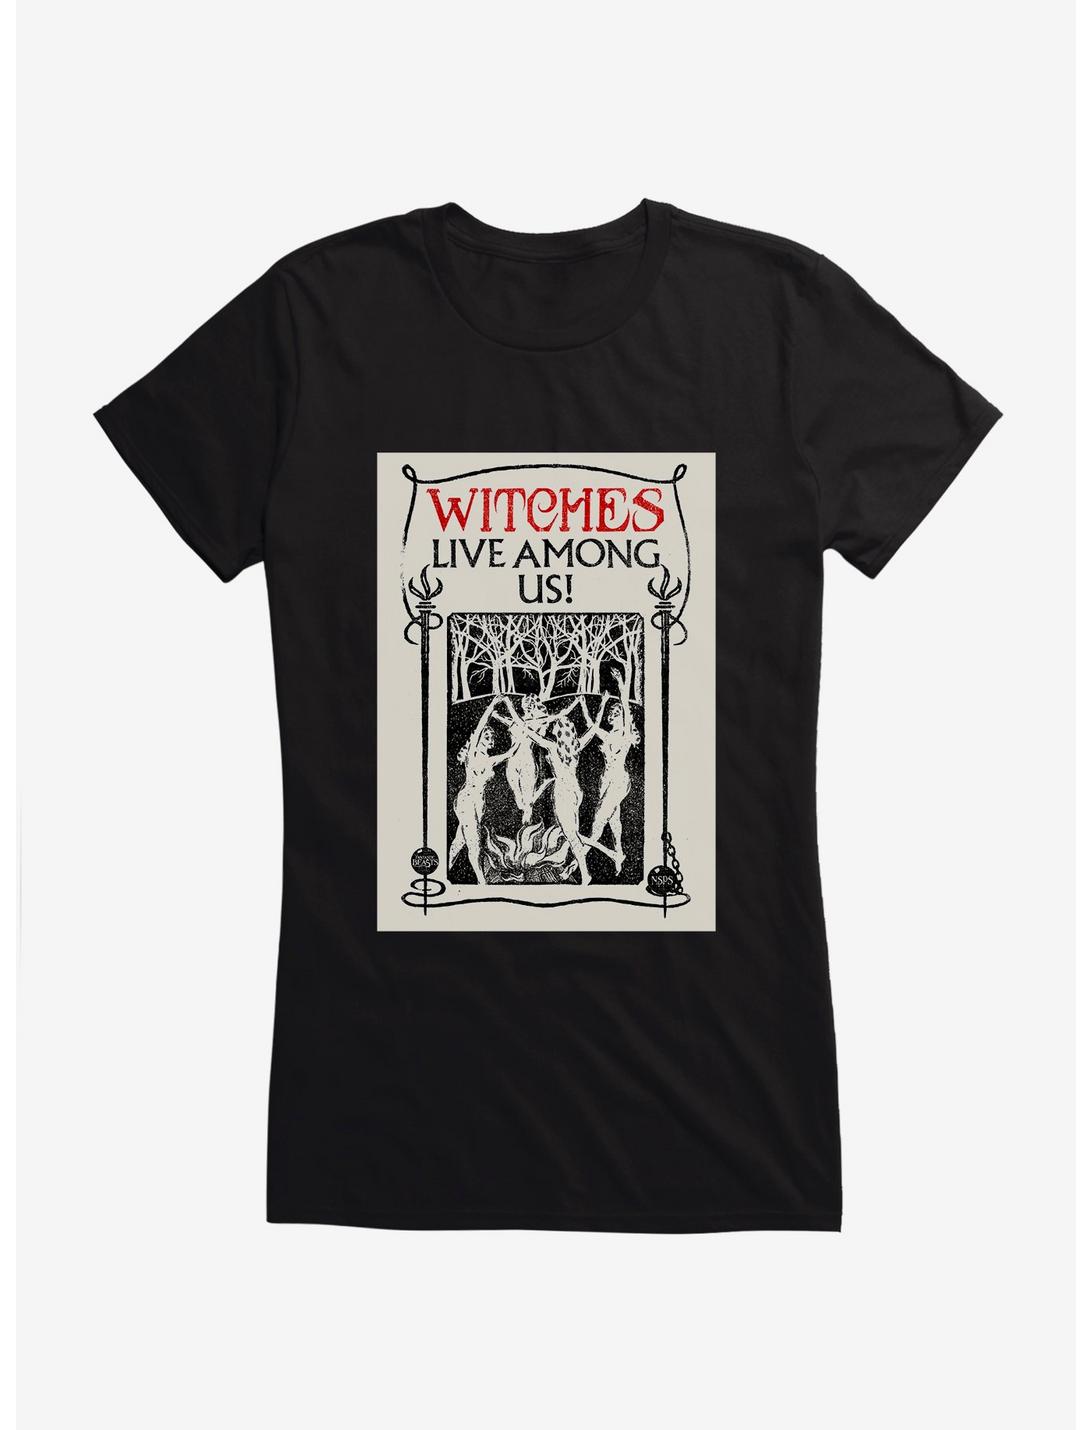 Fantastic Beasts Witches Live Among Us Girls T-Shirt, BLACK, hi-res